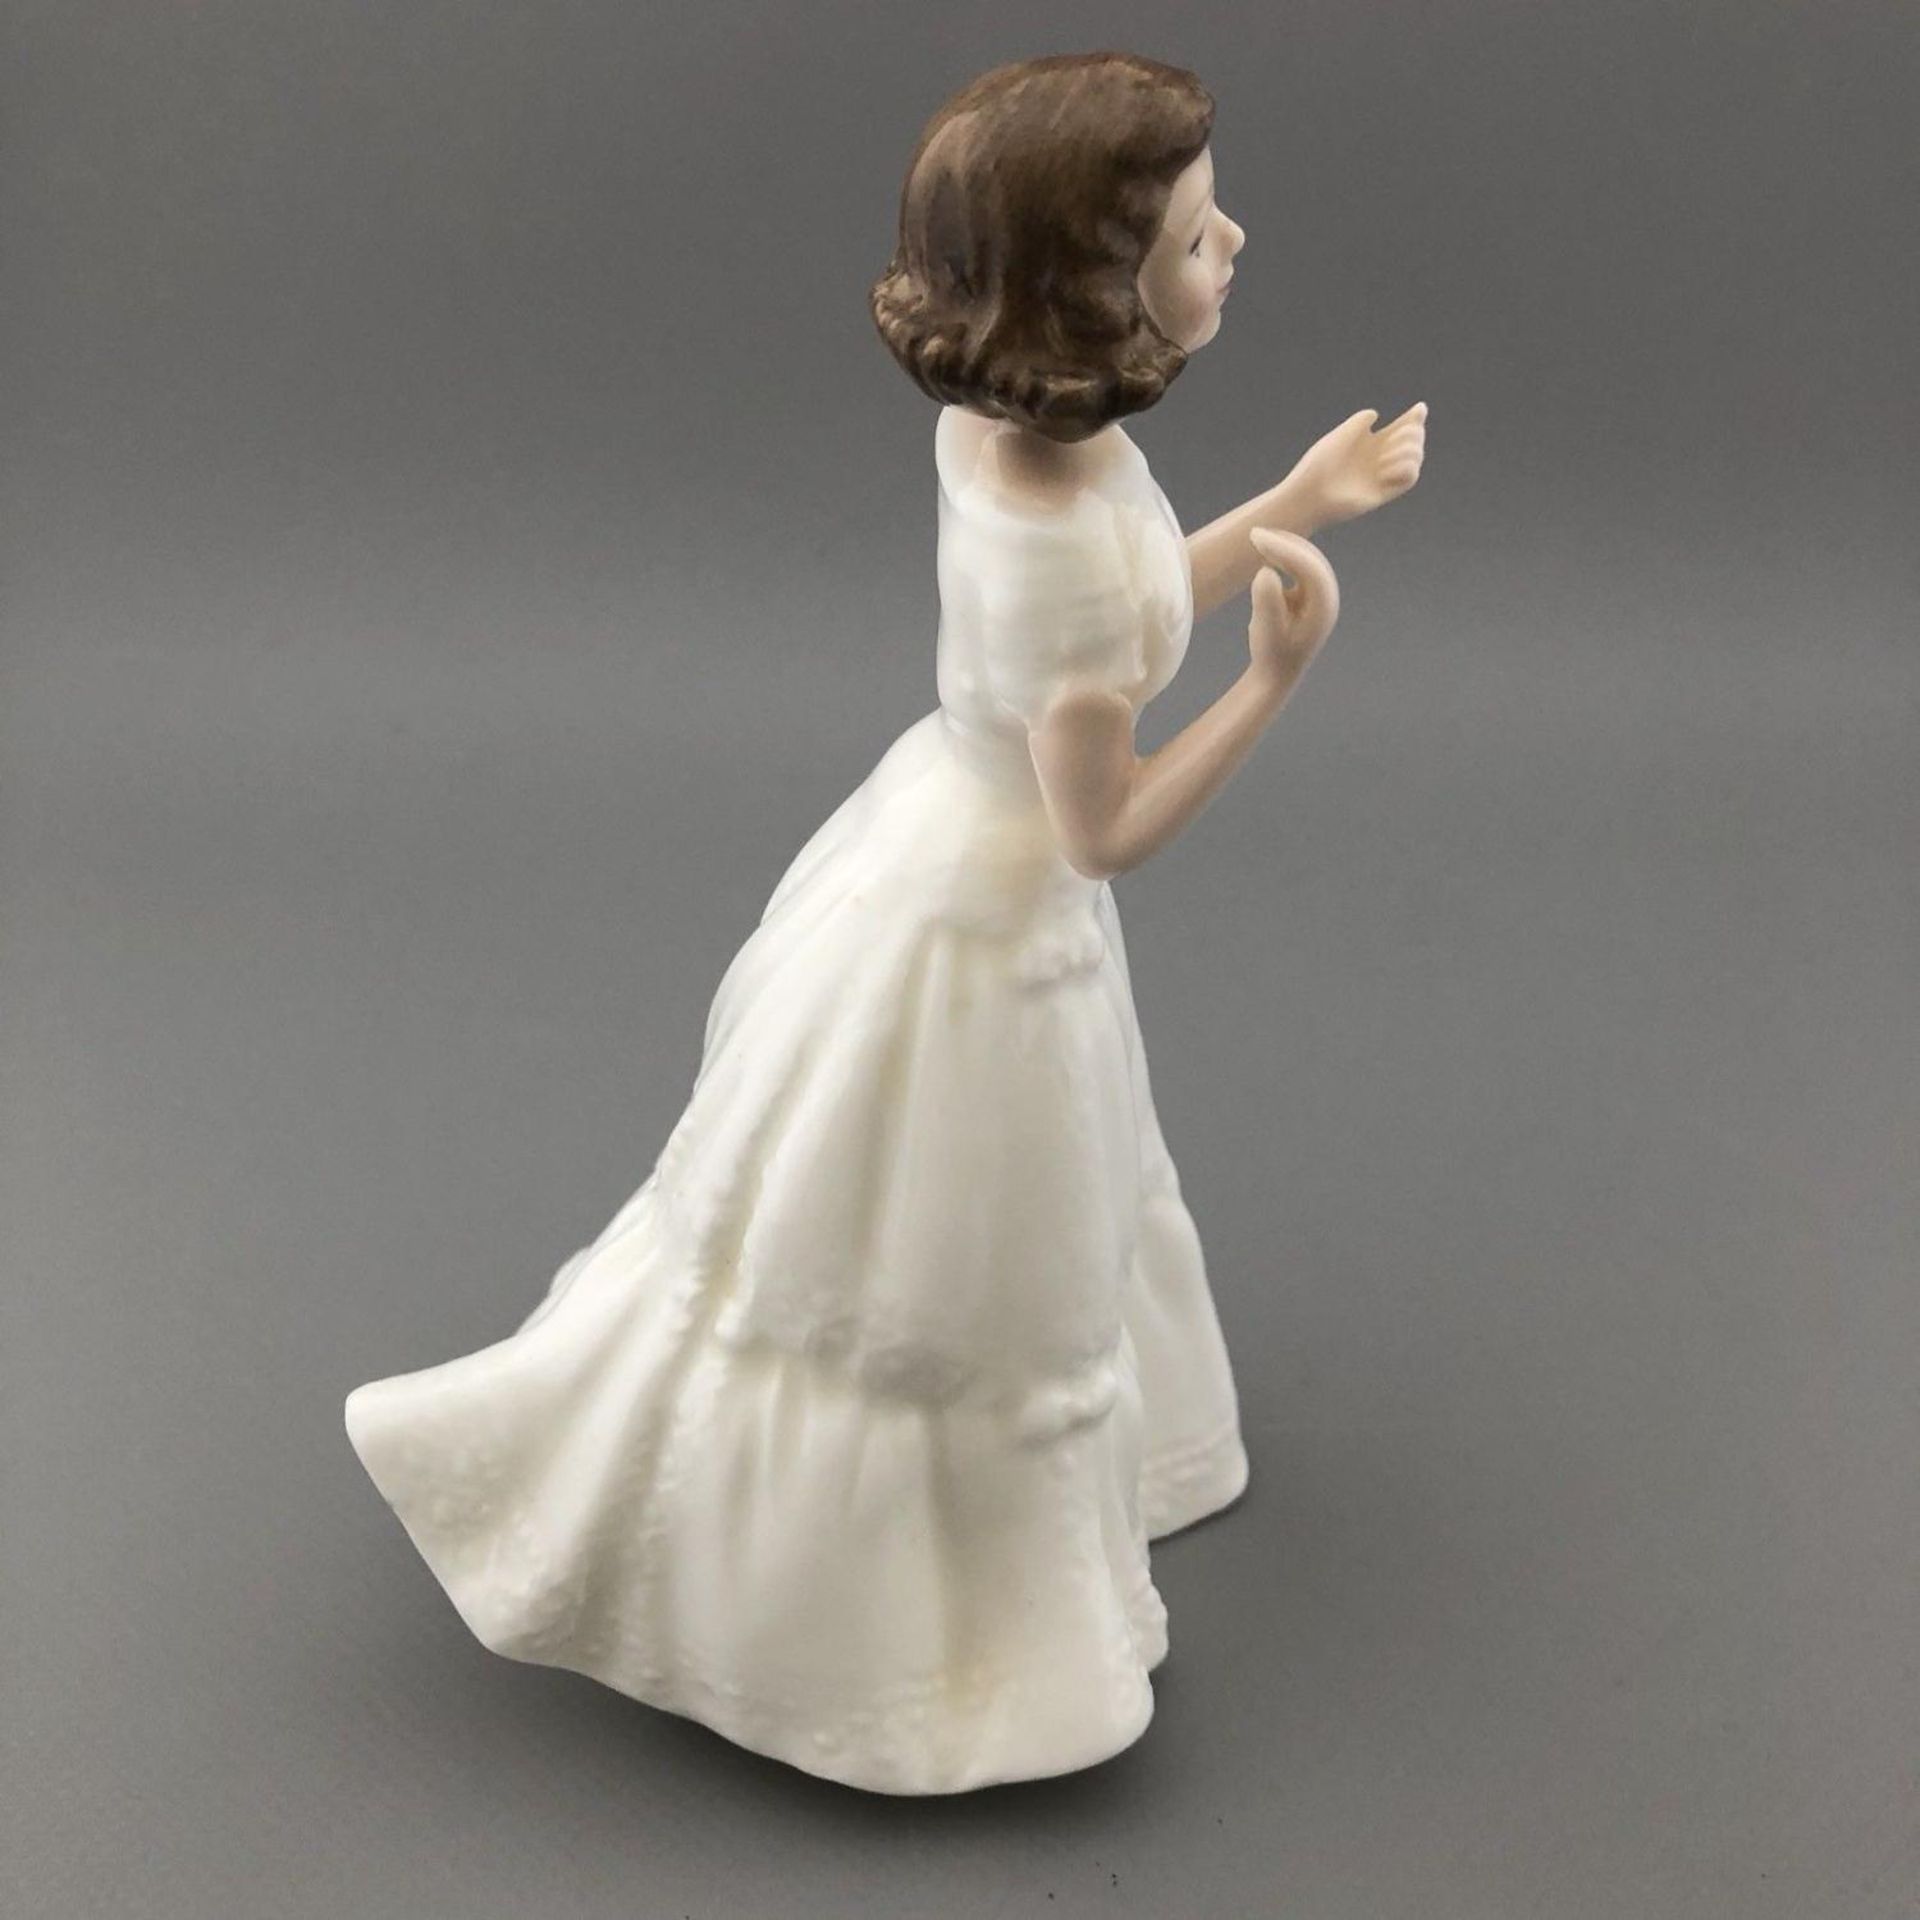 Royal Doulton Figurine "Welcome" Collectors Club HN3764 - Nada M Pedley 1995 - Image 3 of 6